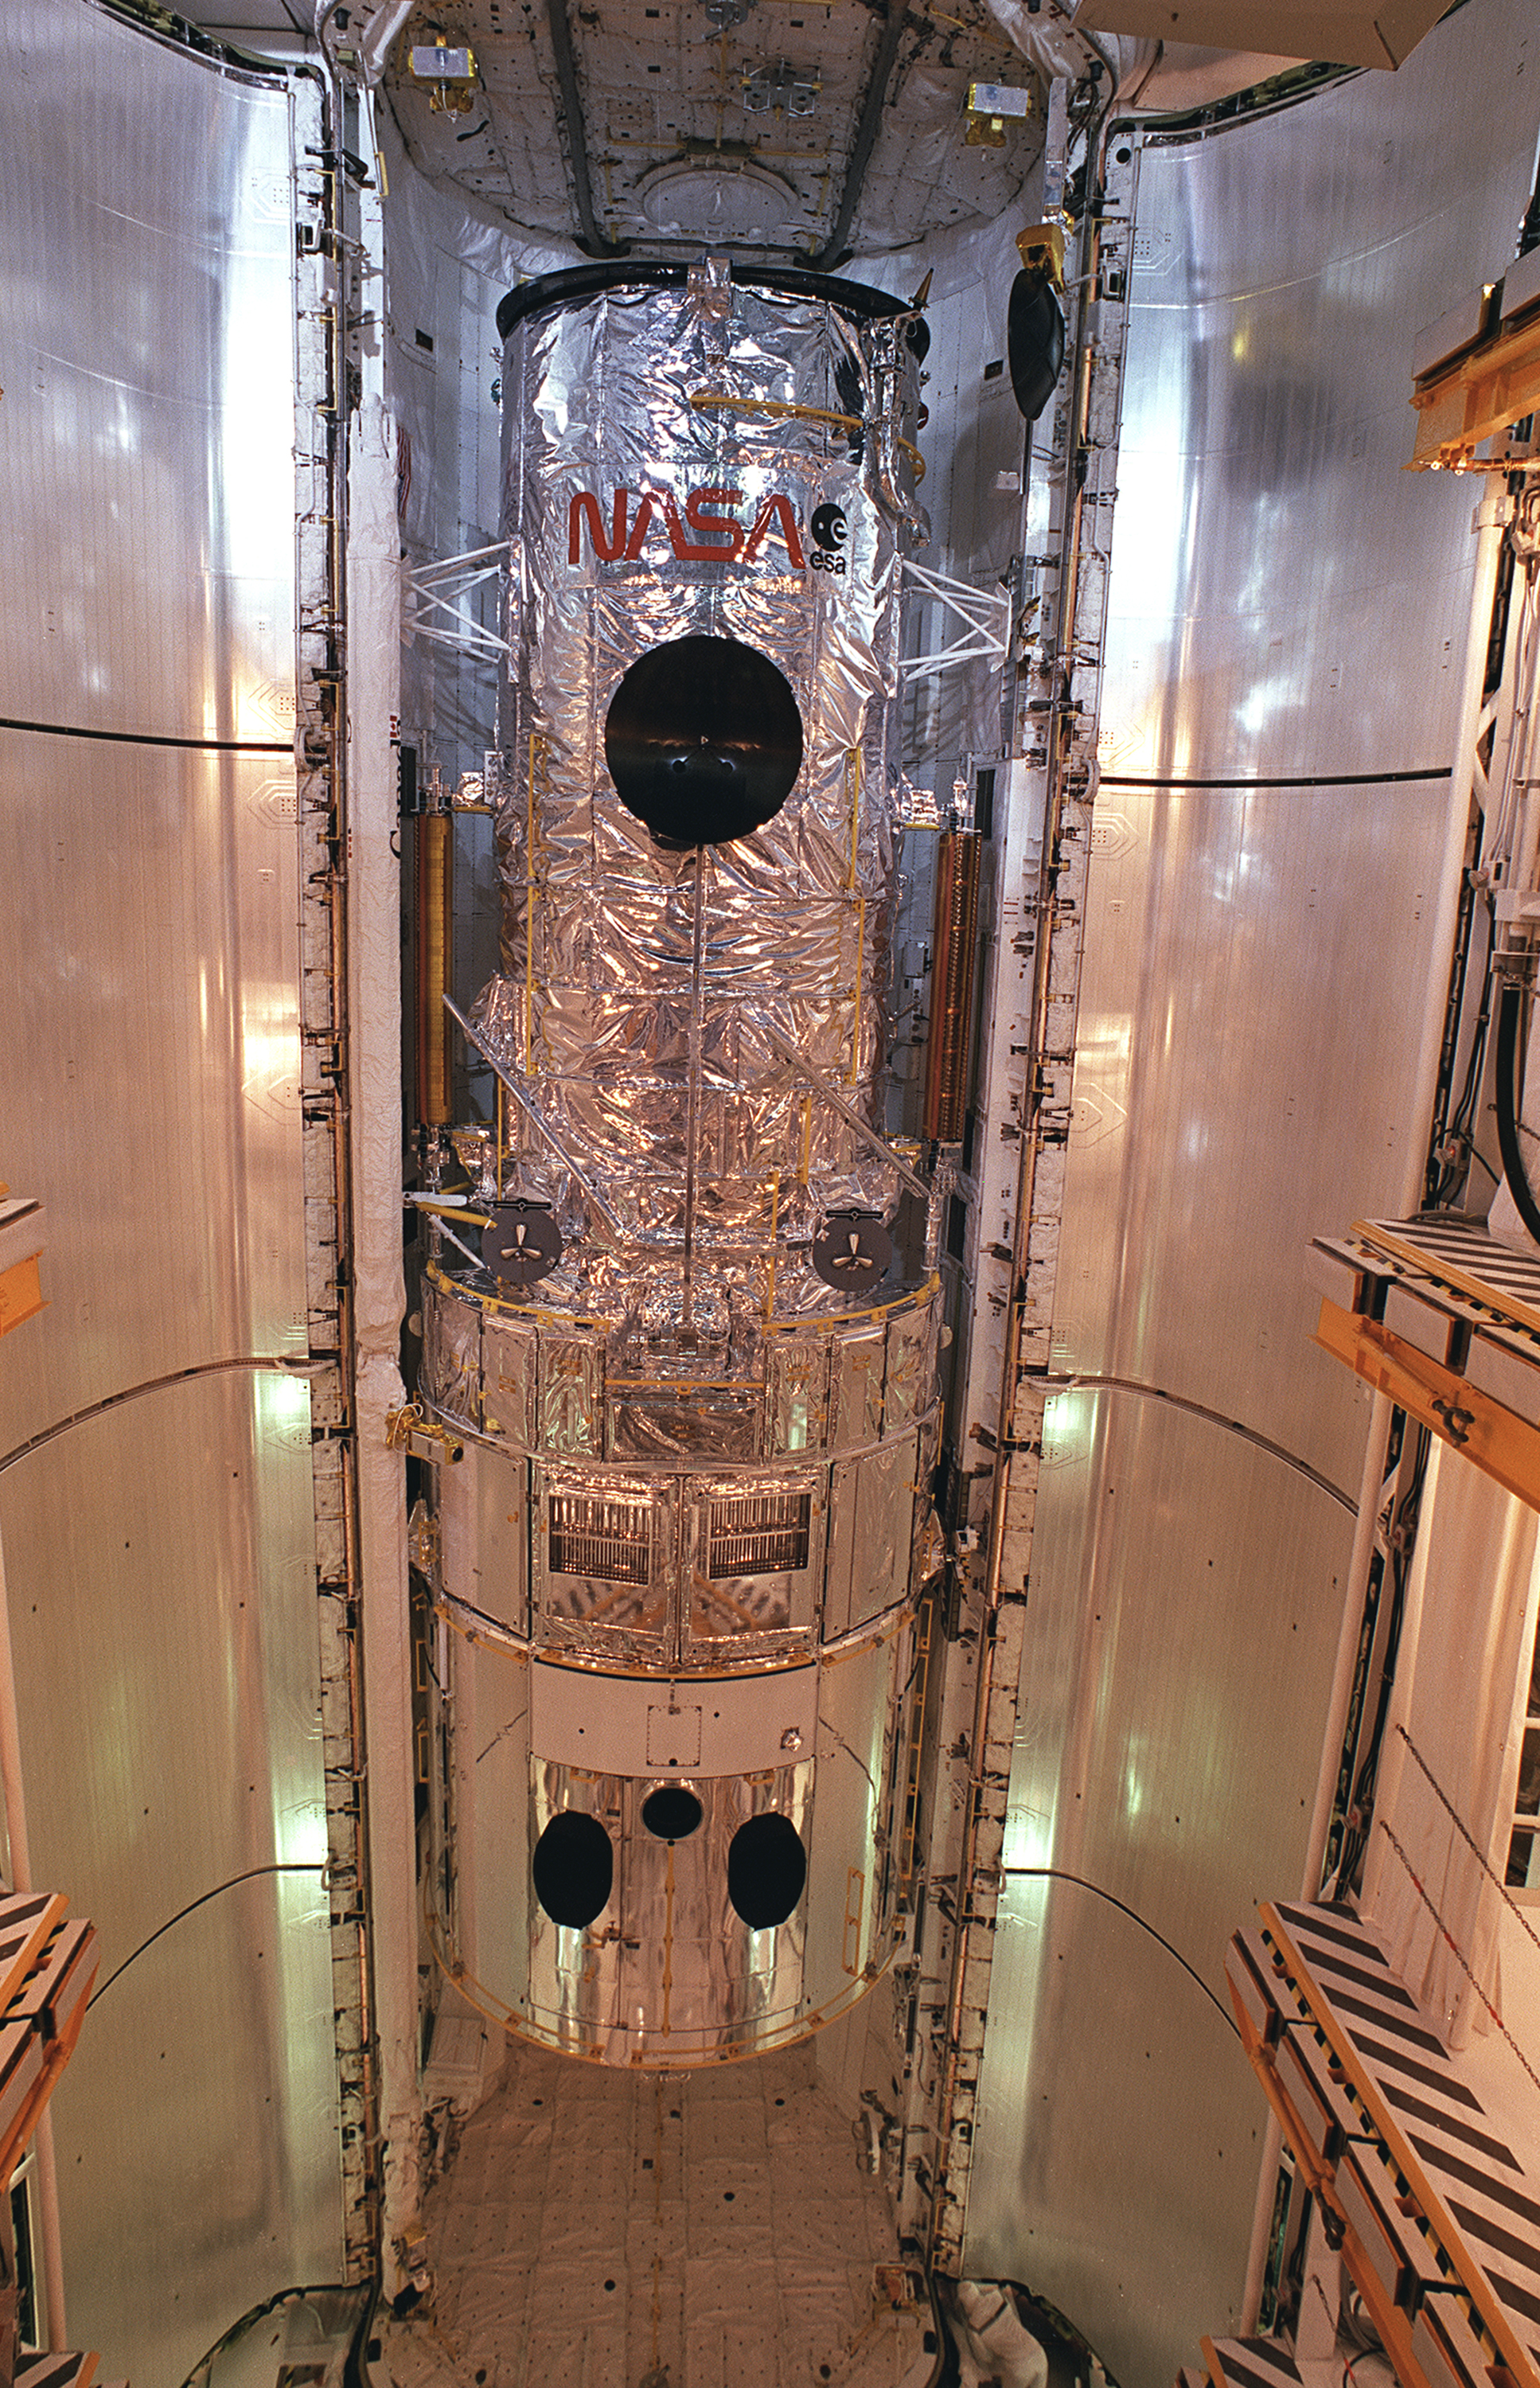 The Hubble telescope sits in the cargo bay of the shuttle.